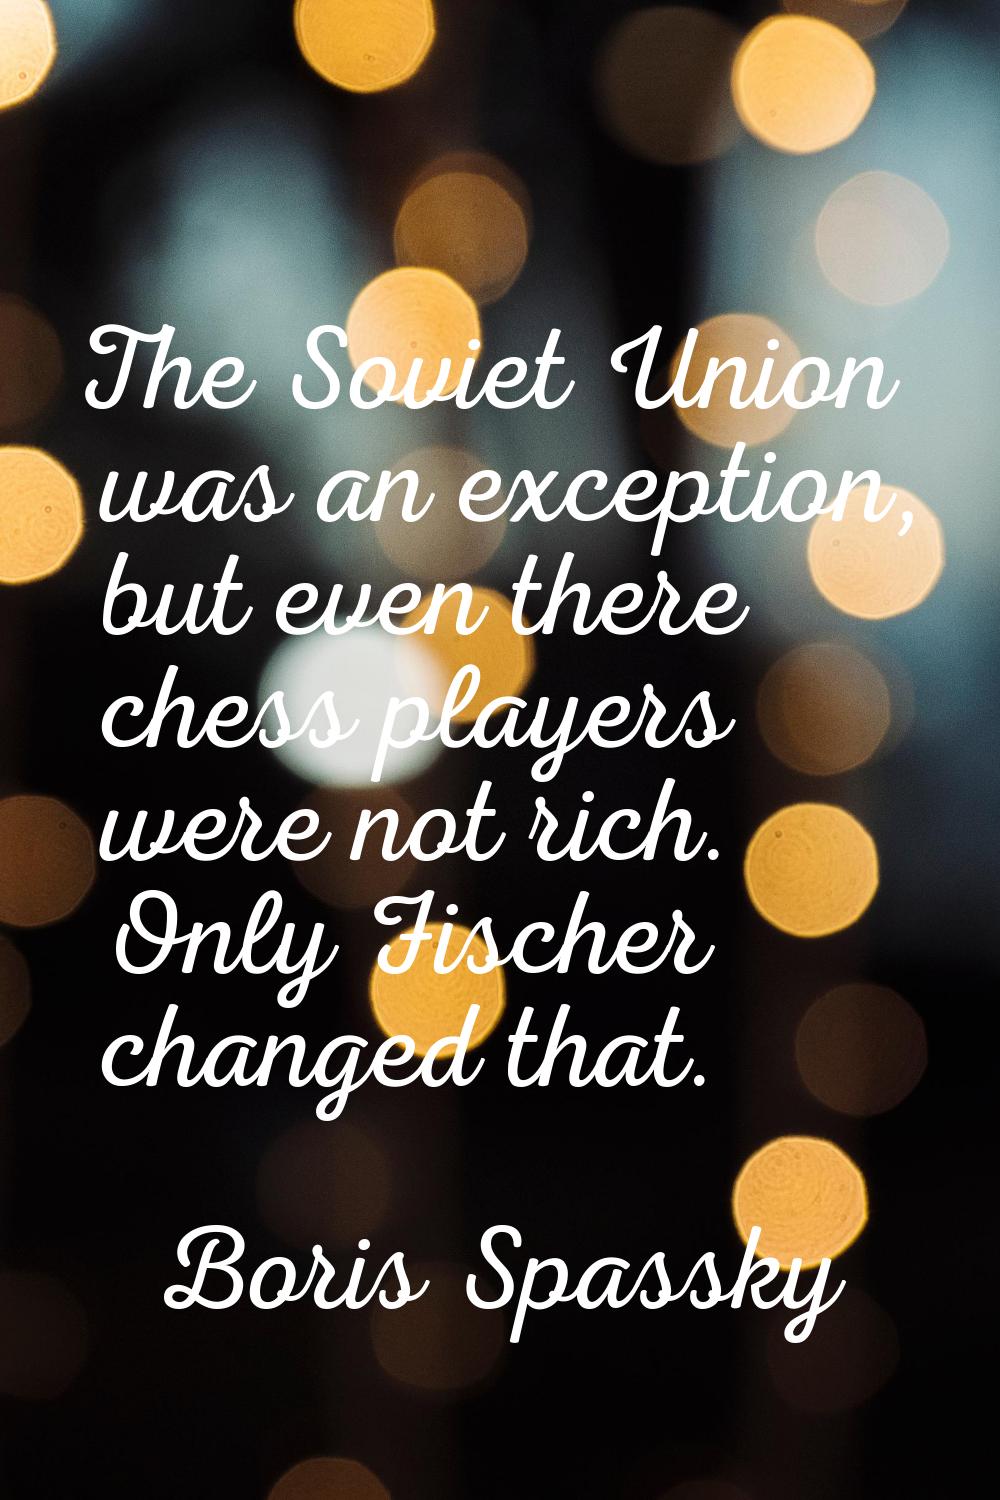 The Soviet Union was an exception, but even there chess players were not rich. Only Fischer changed